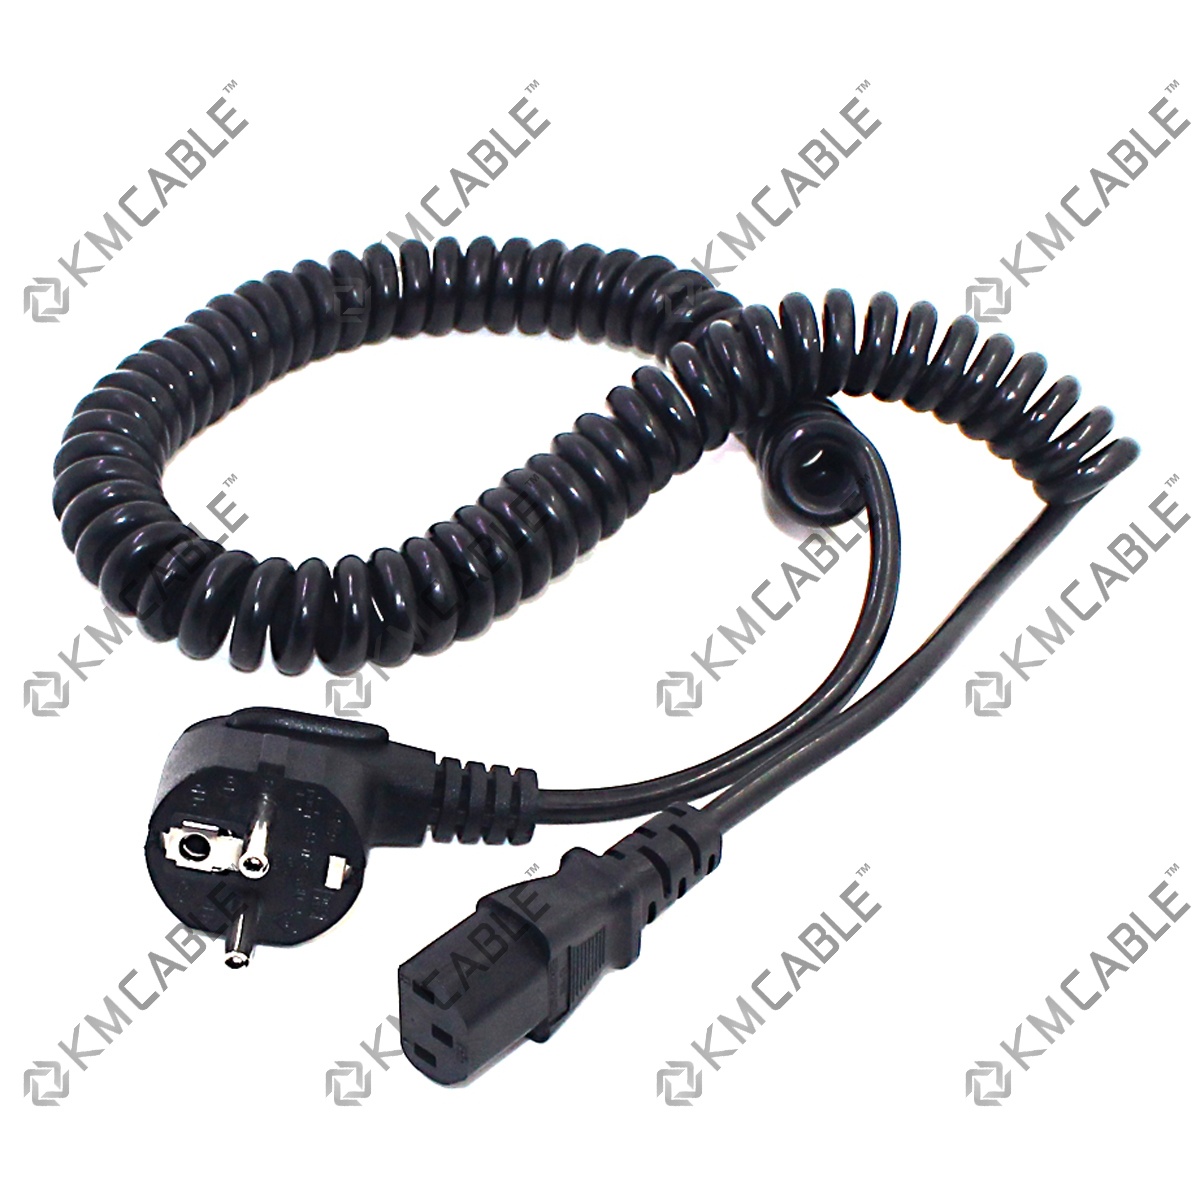 oem-spring-power-dc-cable-ce-plugs-01